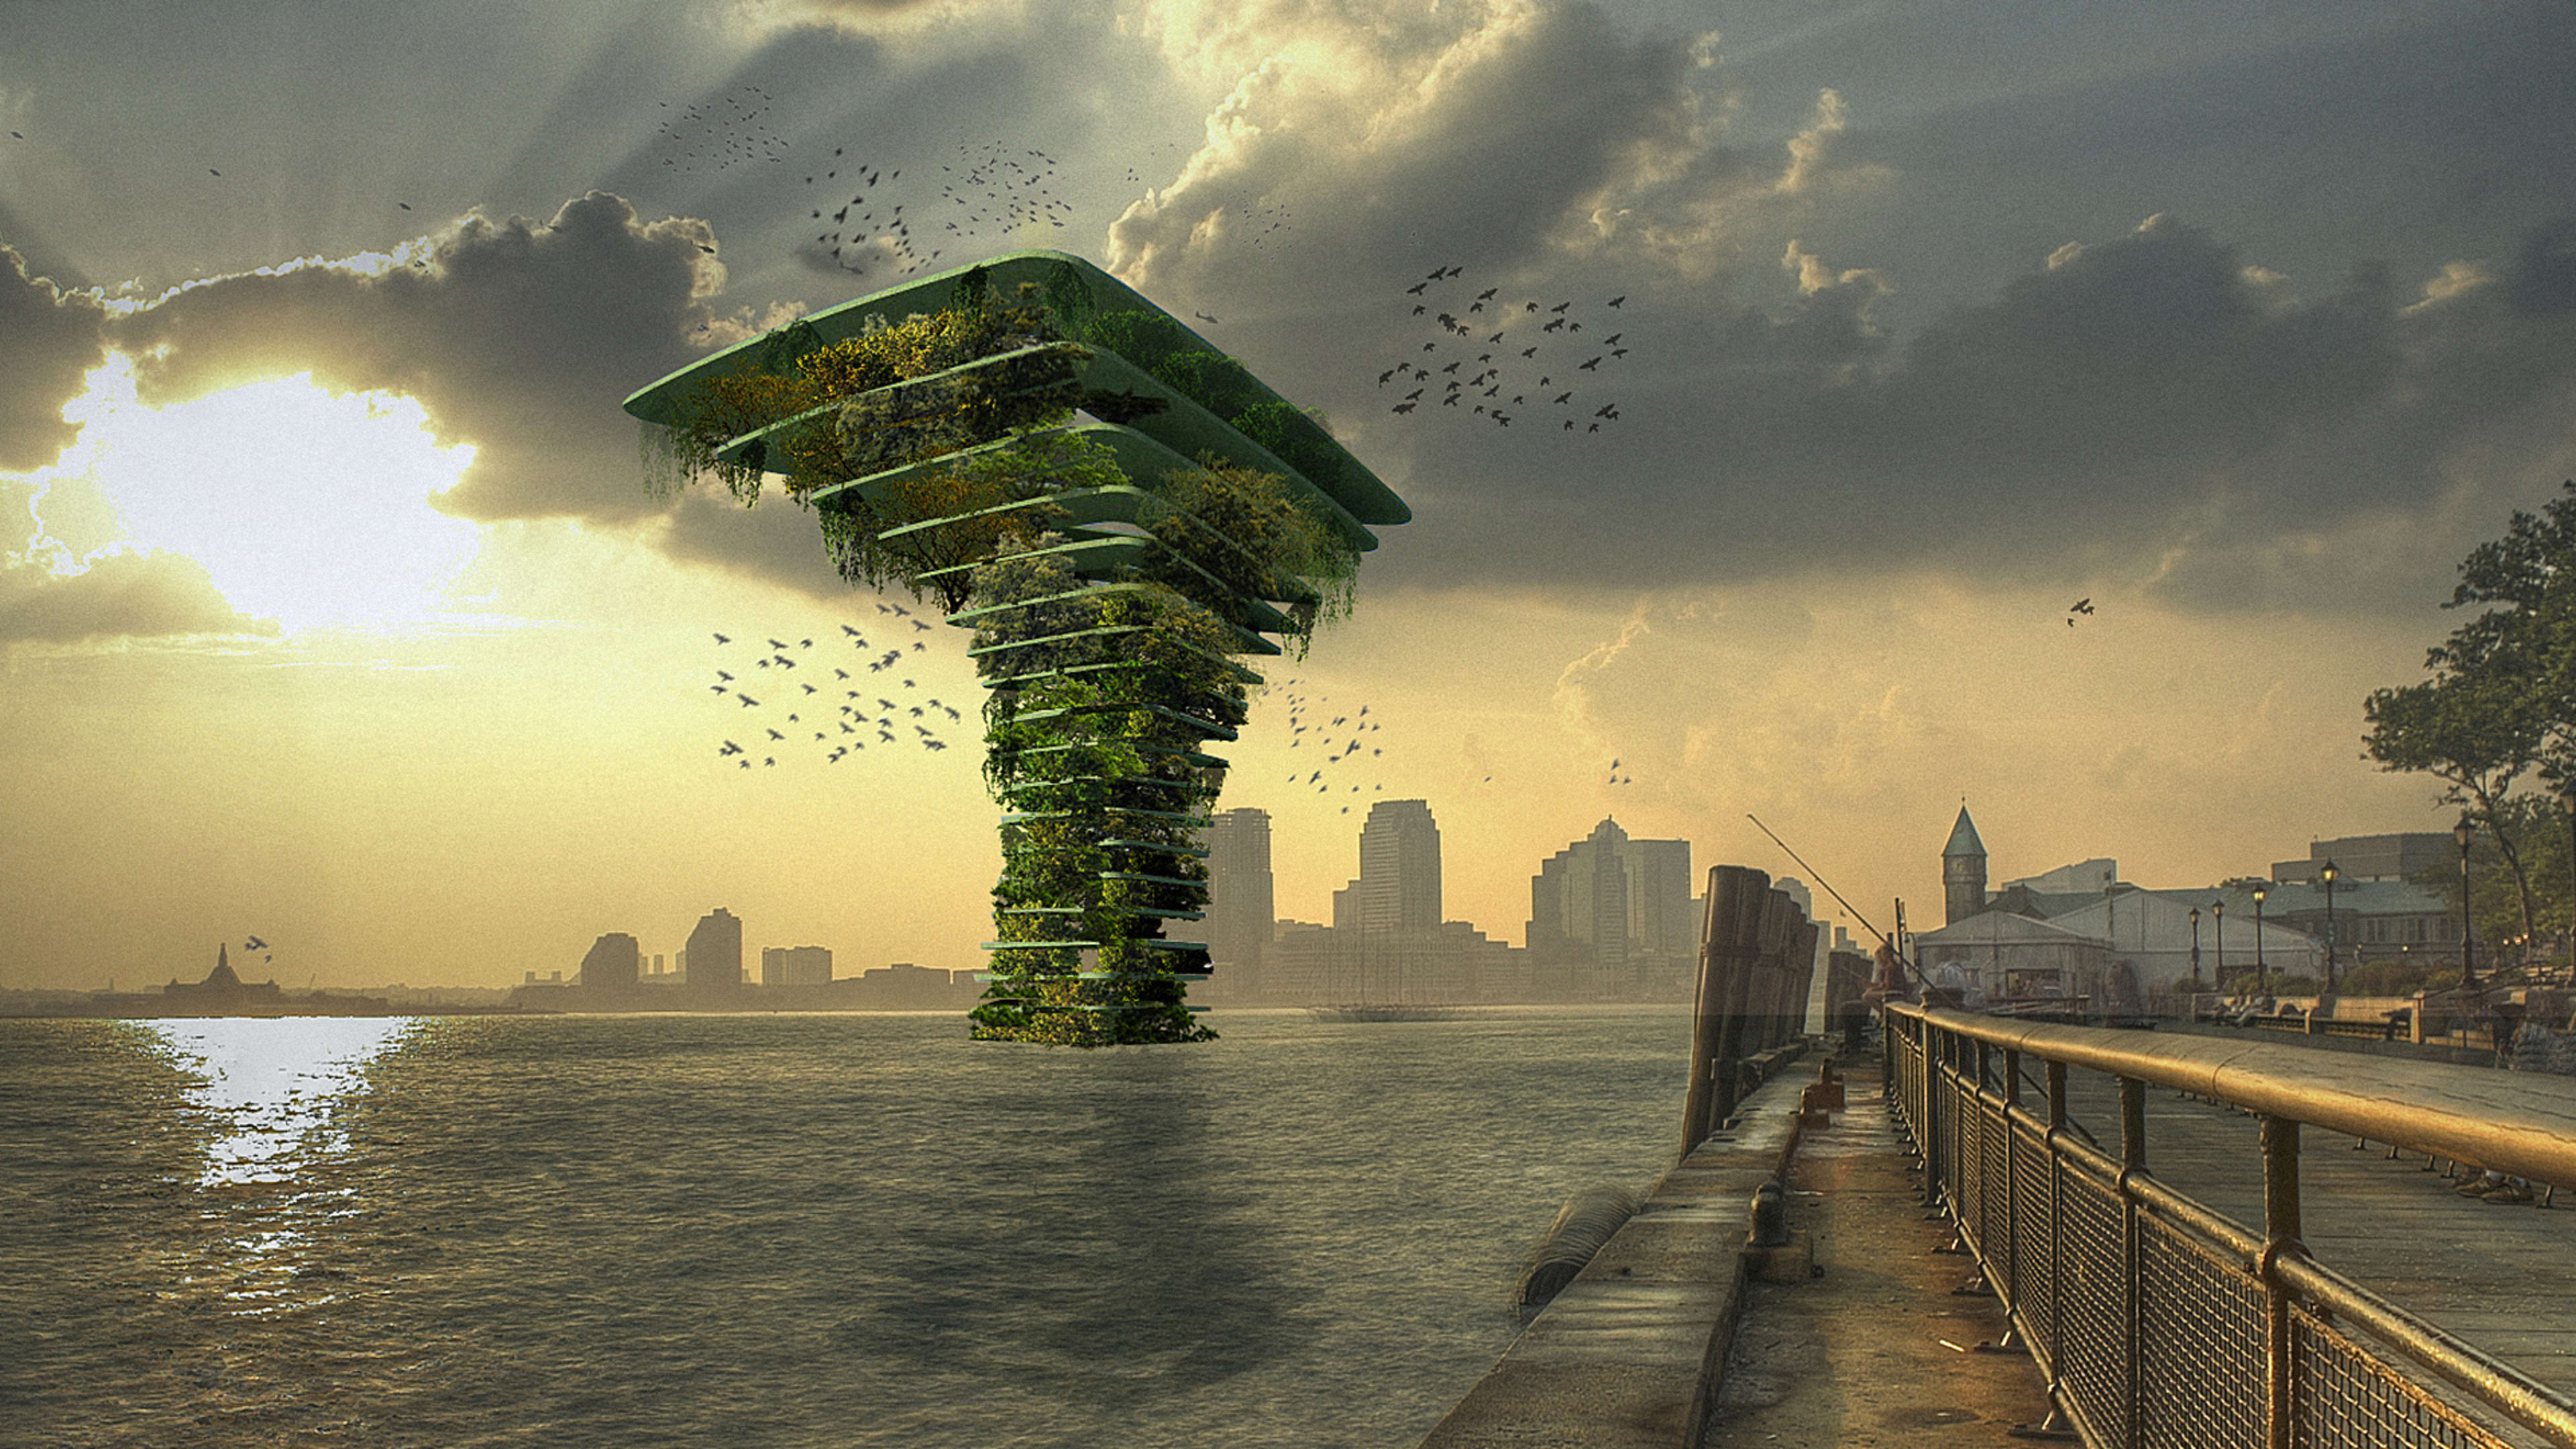 This Giant Tree Protects Urban Wildlife By Keeping It Floating Away From Dangerous People